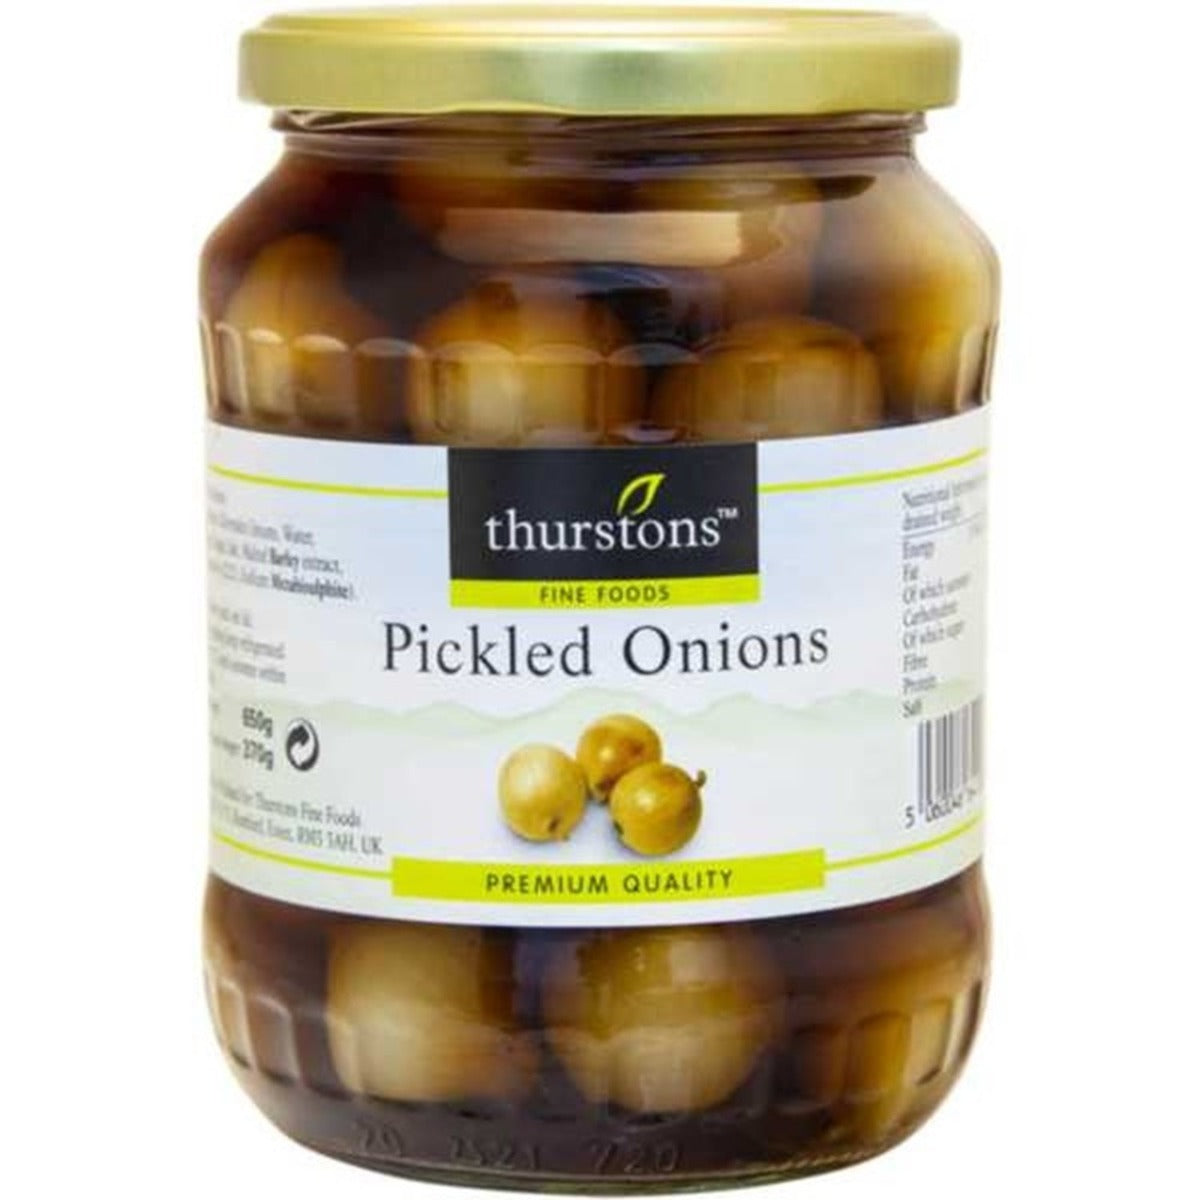 Thurstons - Pickled Onions - 650g - Continental Food Store